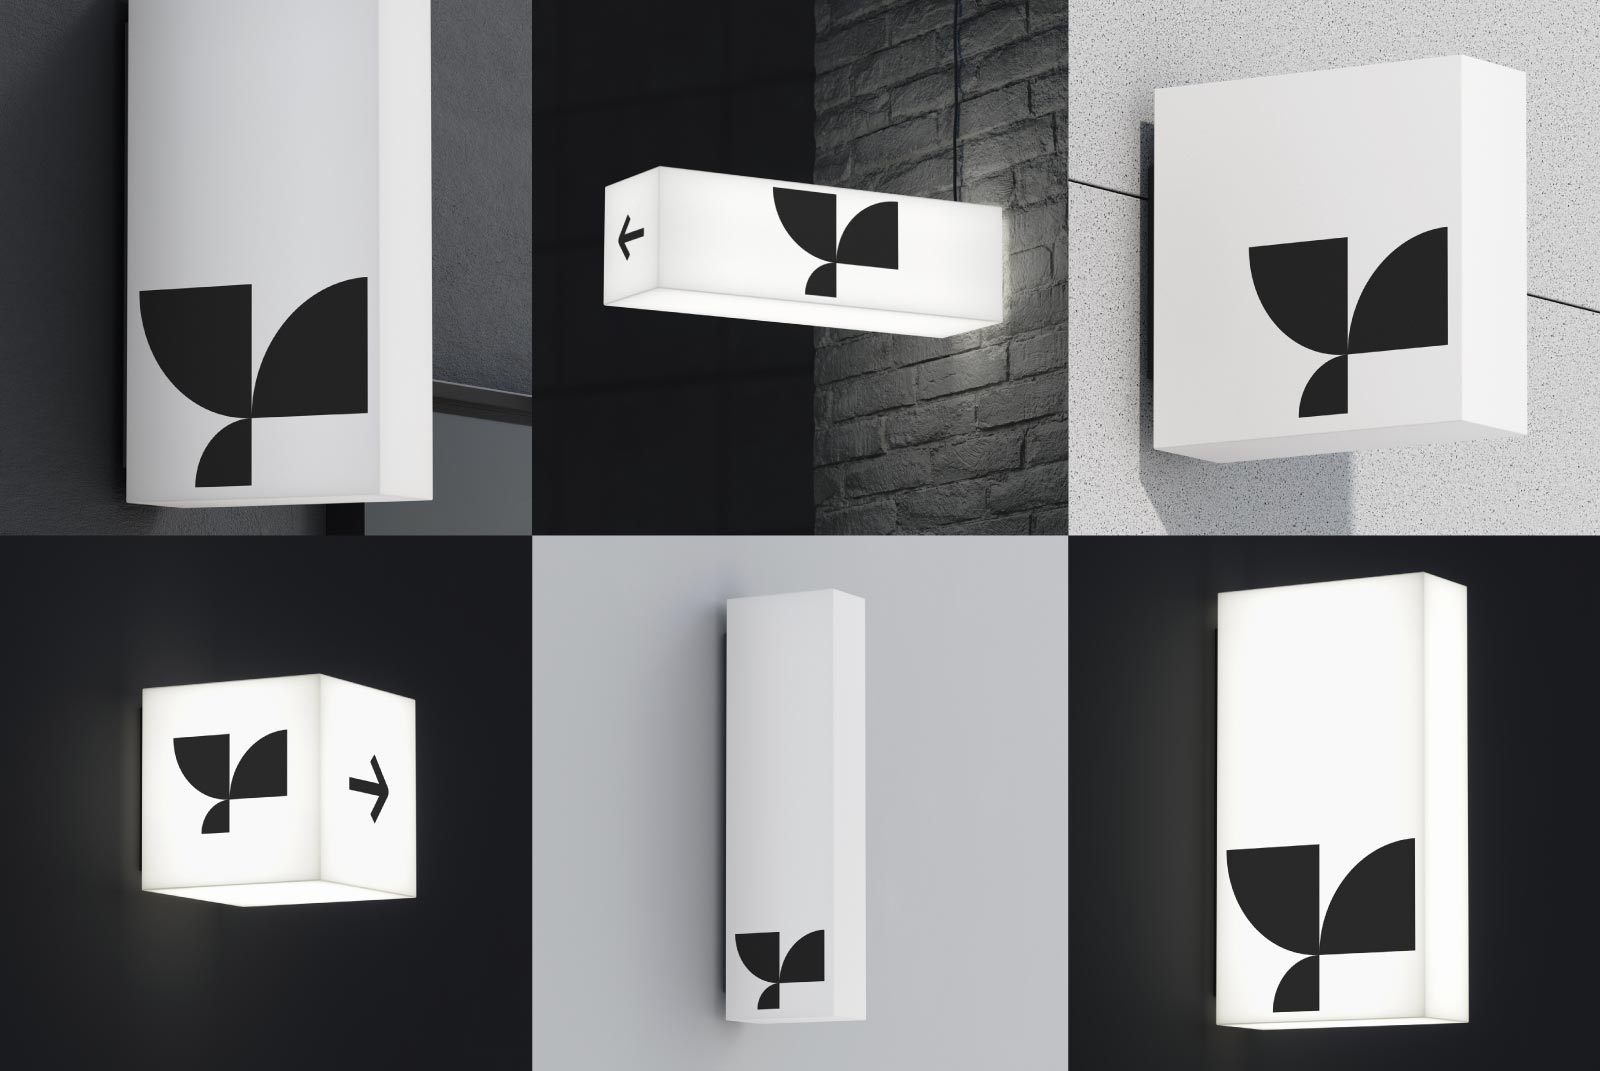 Collection of lightbox mockups in various shapes displayed in a minimalist style, ideal for branding and design presentations.